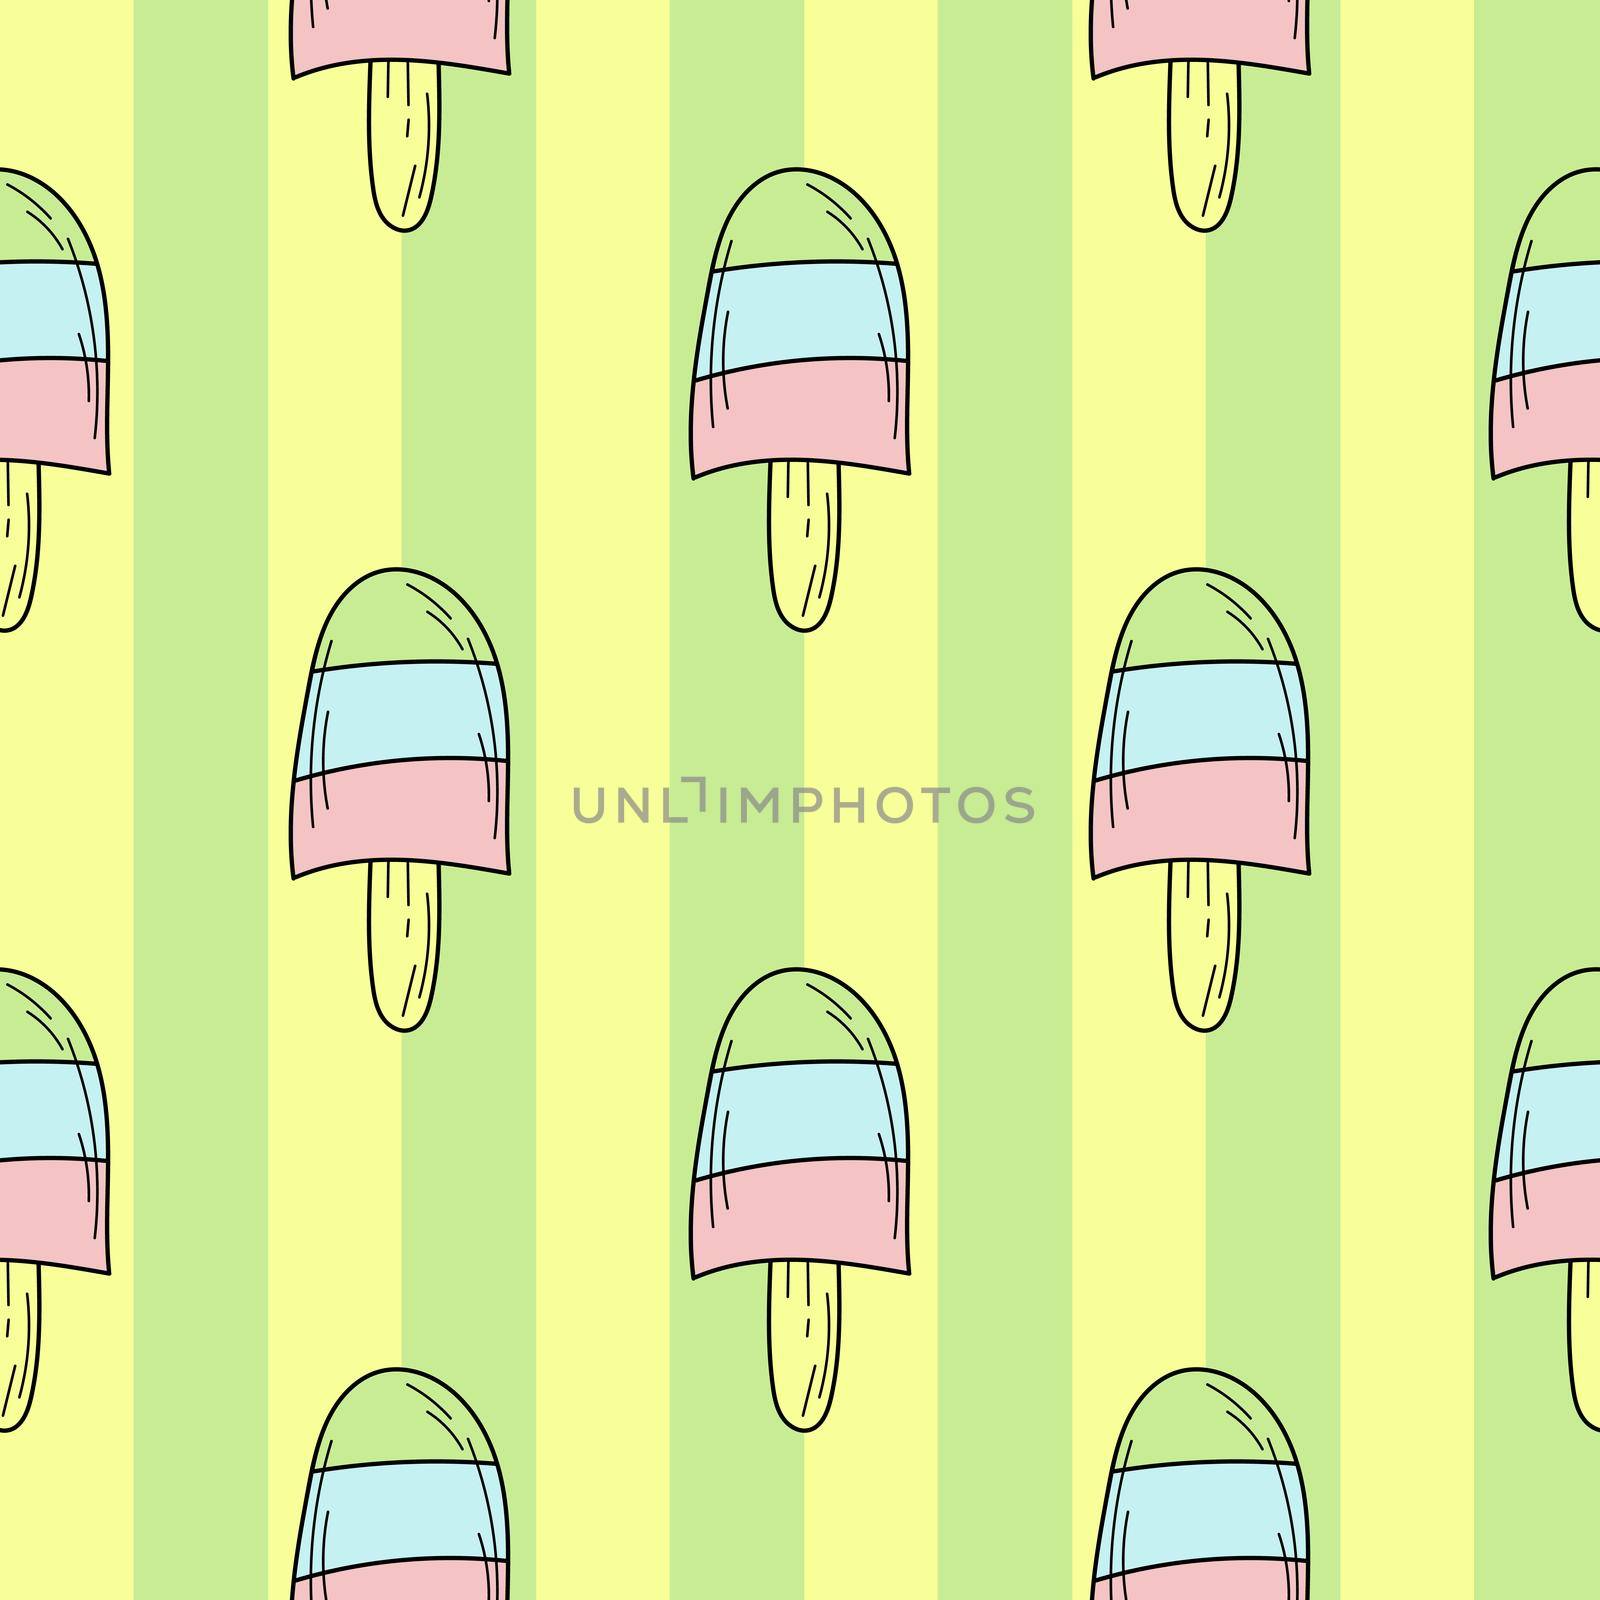 Seamless pattern of color hand drawn Ice cream for design. Endless pattern on green striped background for print, textile, packaging, menu